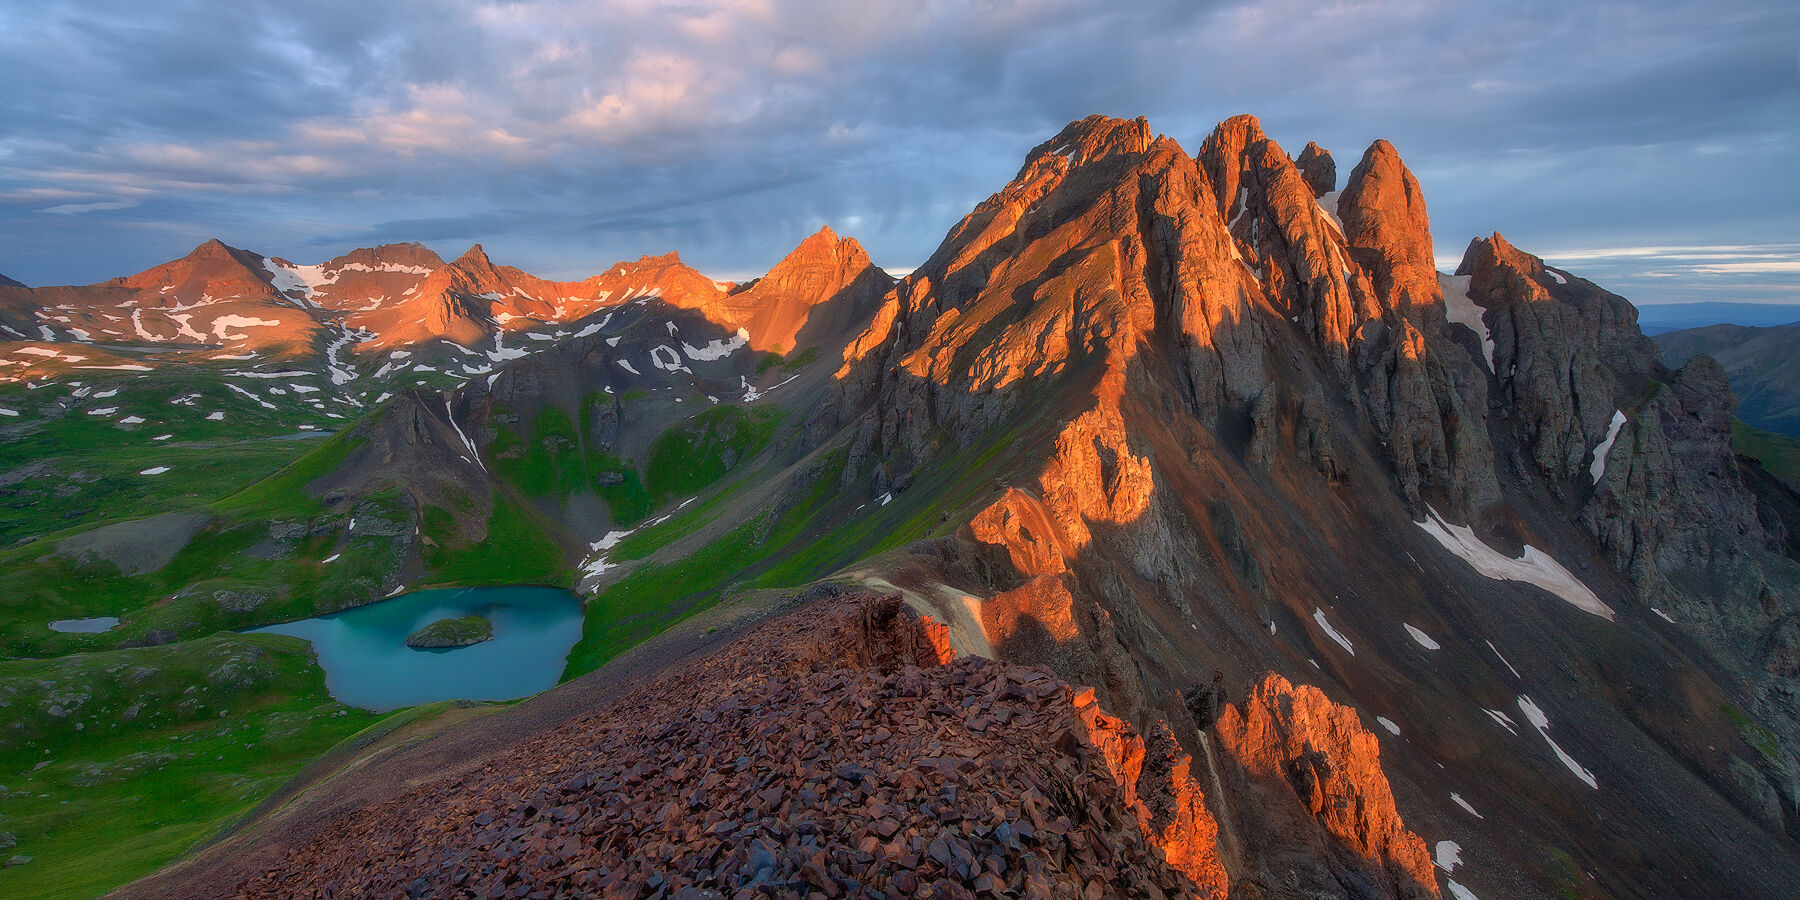 Sun lights up the top of the red mountains that cast a shadow on to a lake that reflects the entire sky and scene.